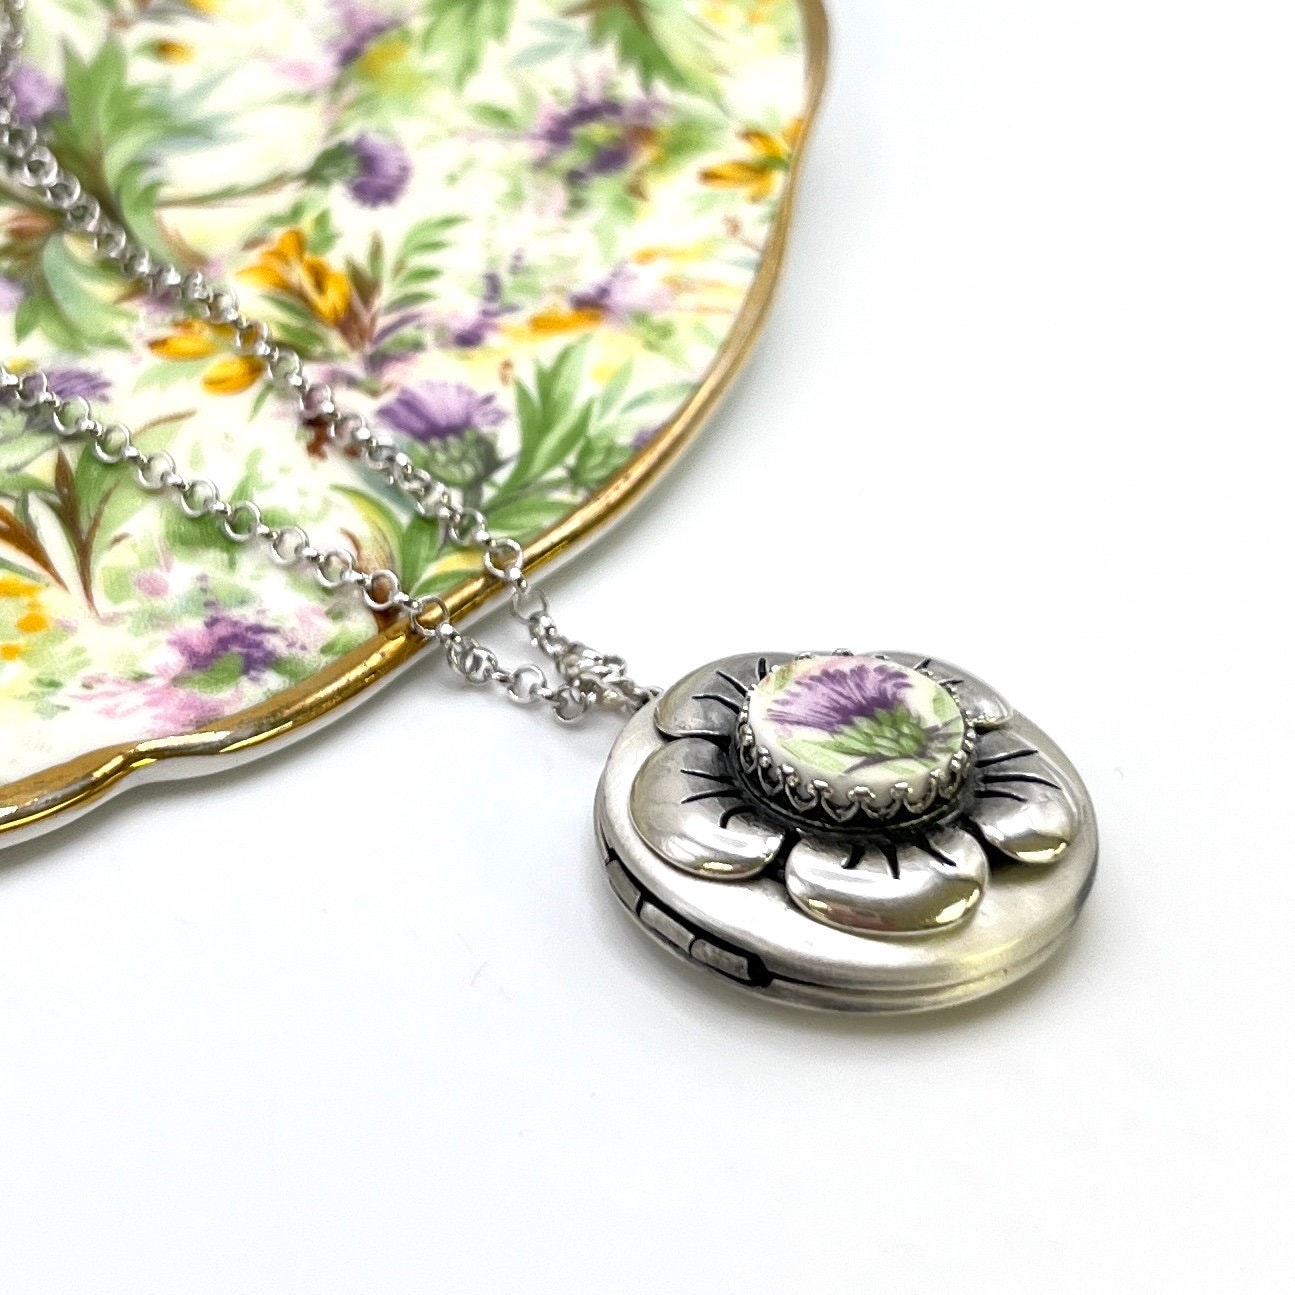 Scottish Thistle Photo Locket Necklace, Silver Jewelry, Scottish Broken China Jewelry, Anniversary Gift for Wife, Gifts for Women